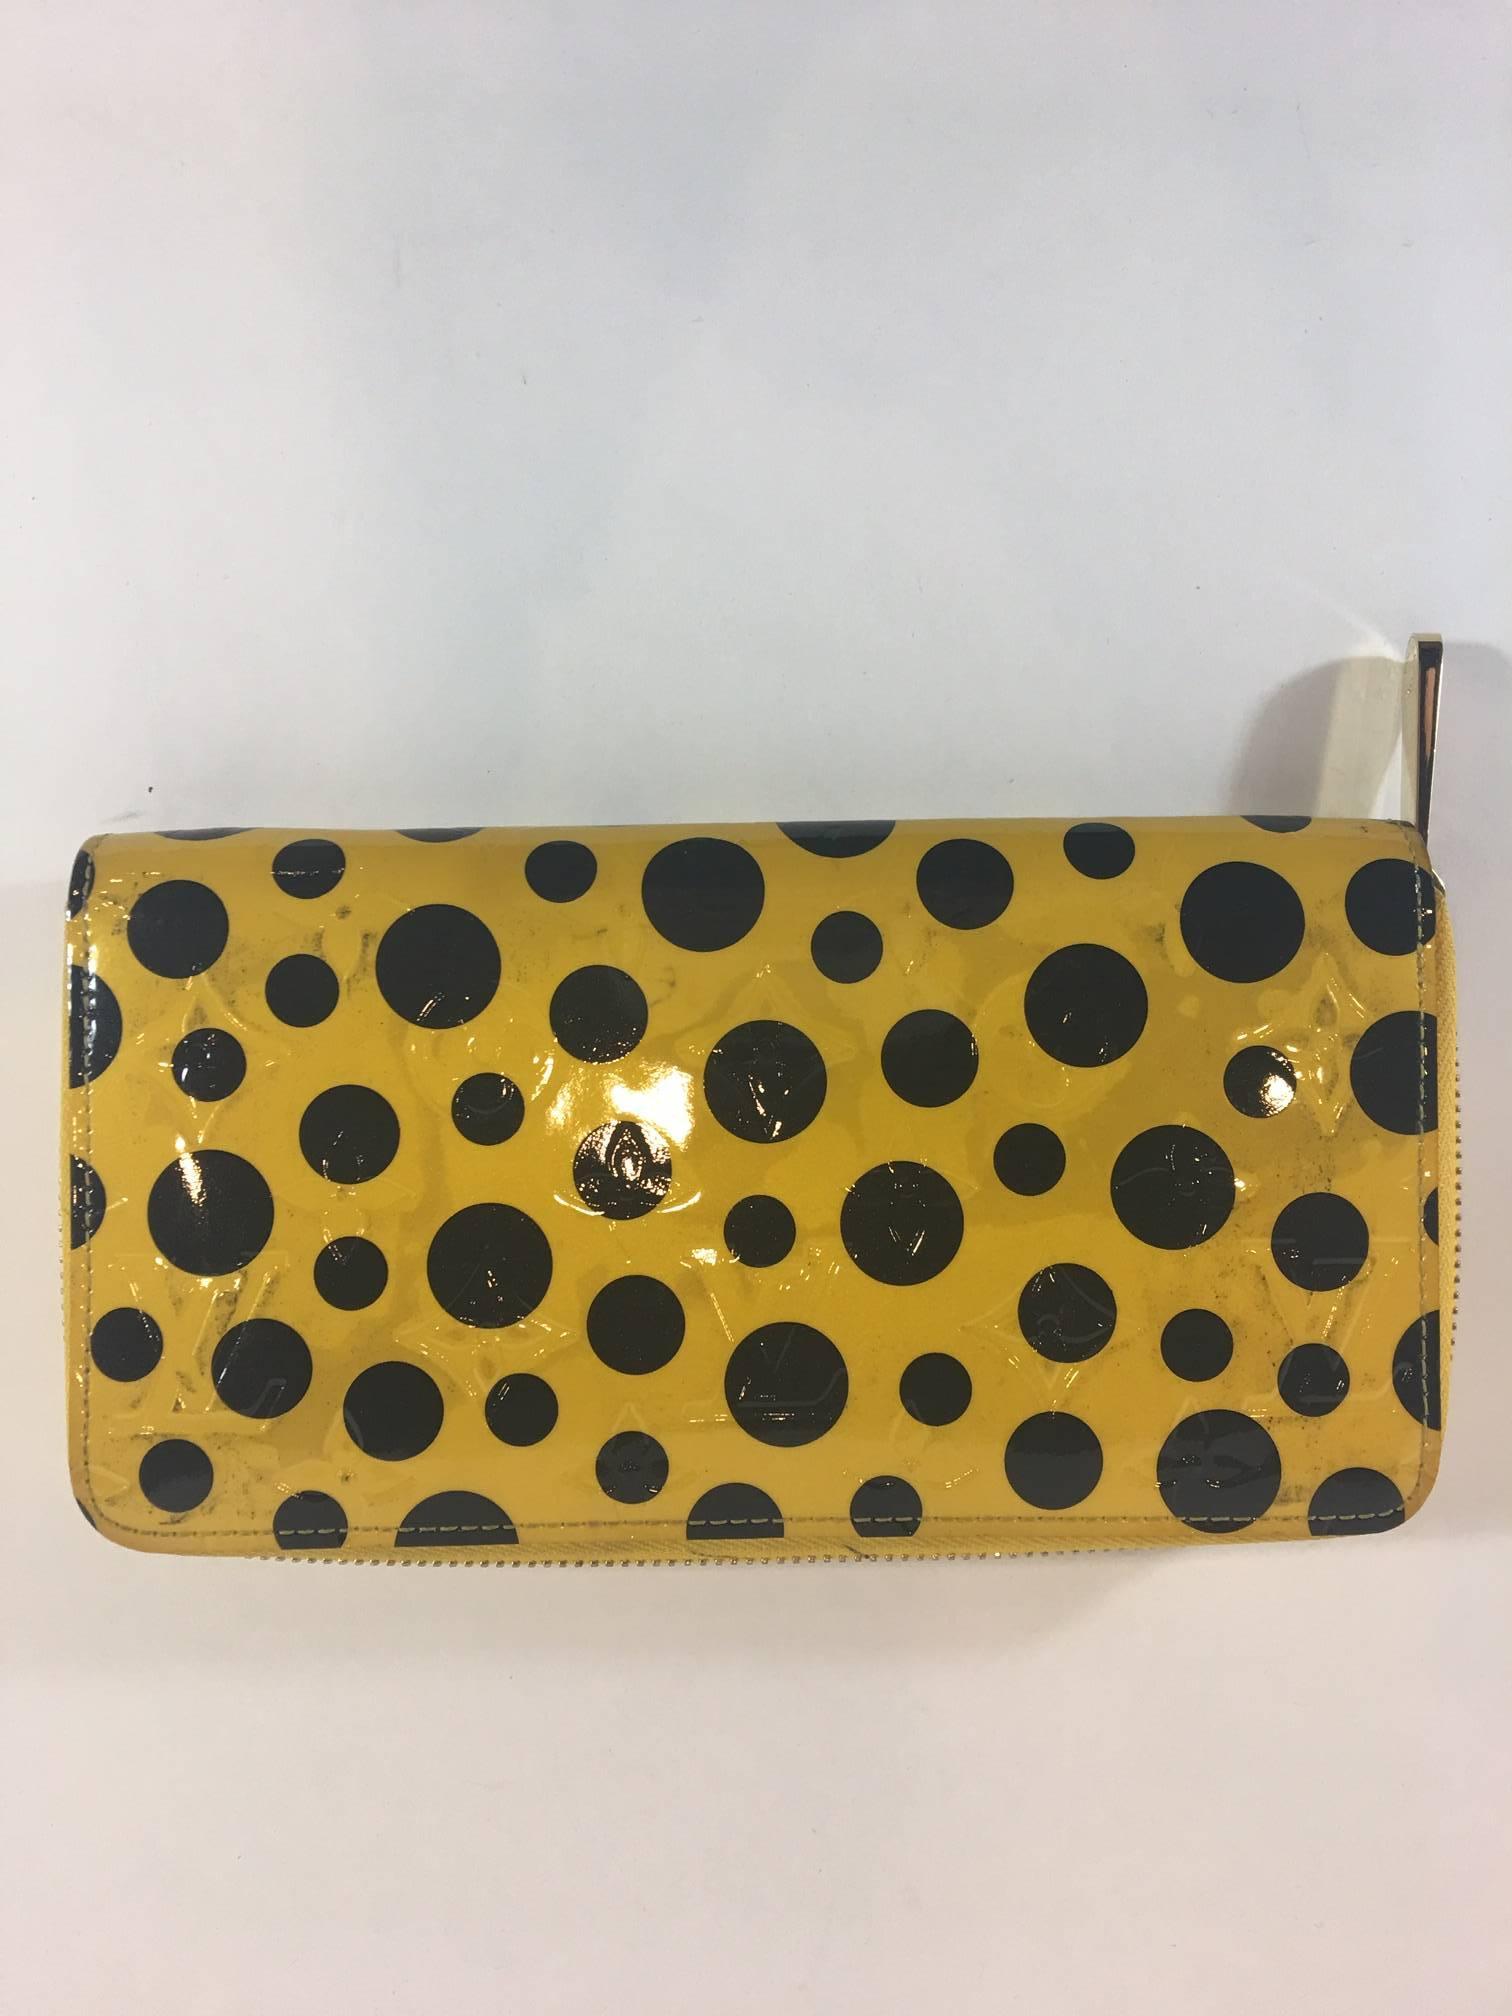 Artistic Director Marc Jacobs approached Yayoi Kusama (known for her dot obsession) and asked her to design a limited edition collection for Louis Vuitton. The Yayoi Kusama collaboration began with this Infinity Dots Vernis wallet which shows thhe